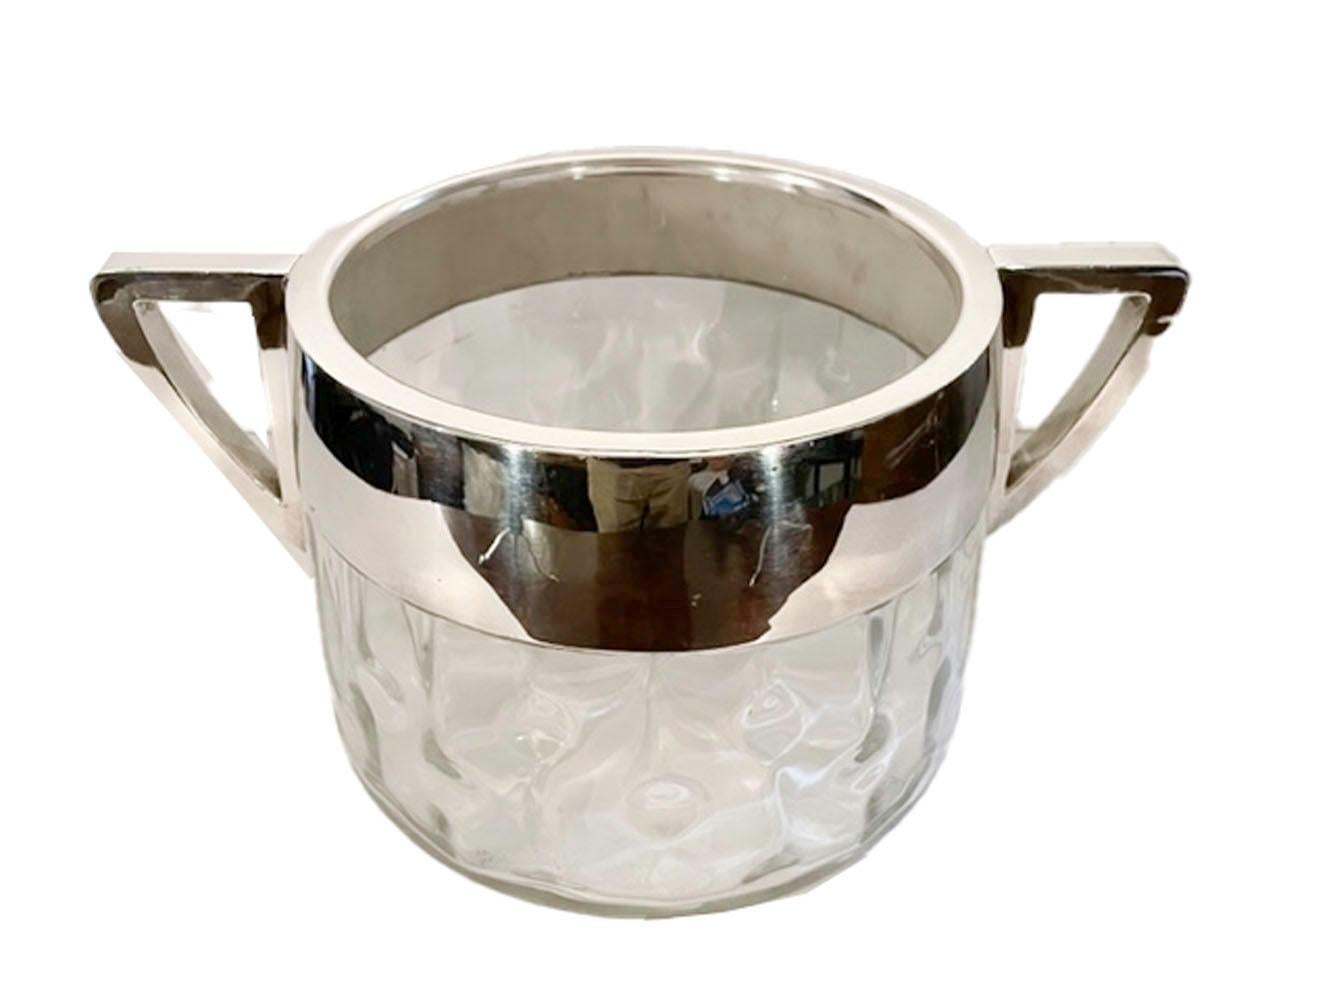 Vienna Secession Viennese Secessionist 'Meteor' Glass Champagne Bucket Designed by Koloman Moser